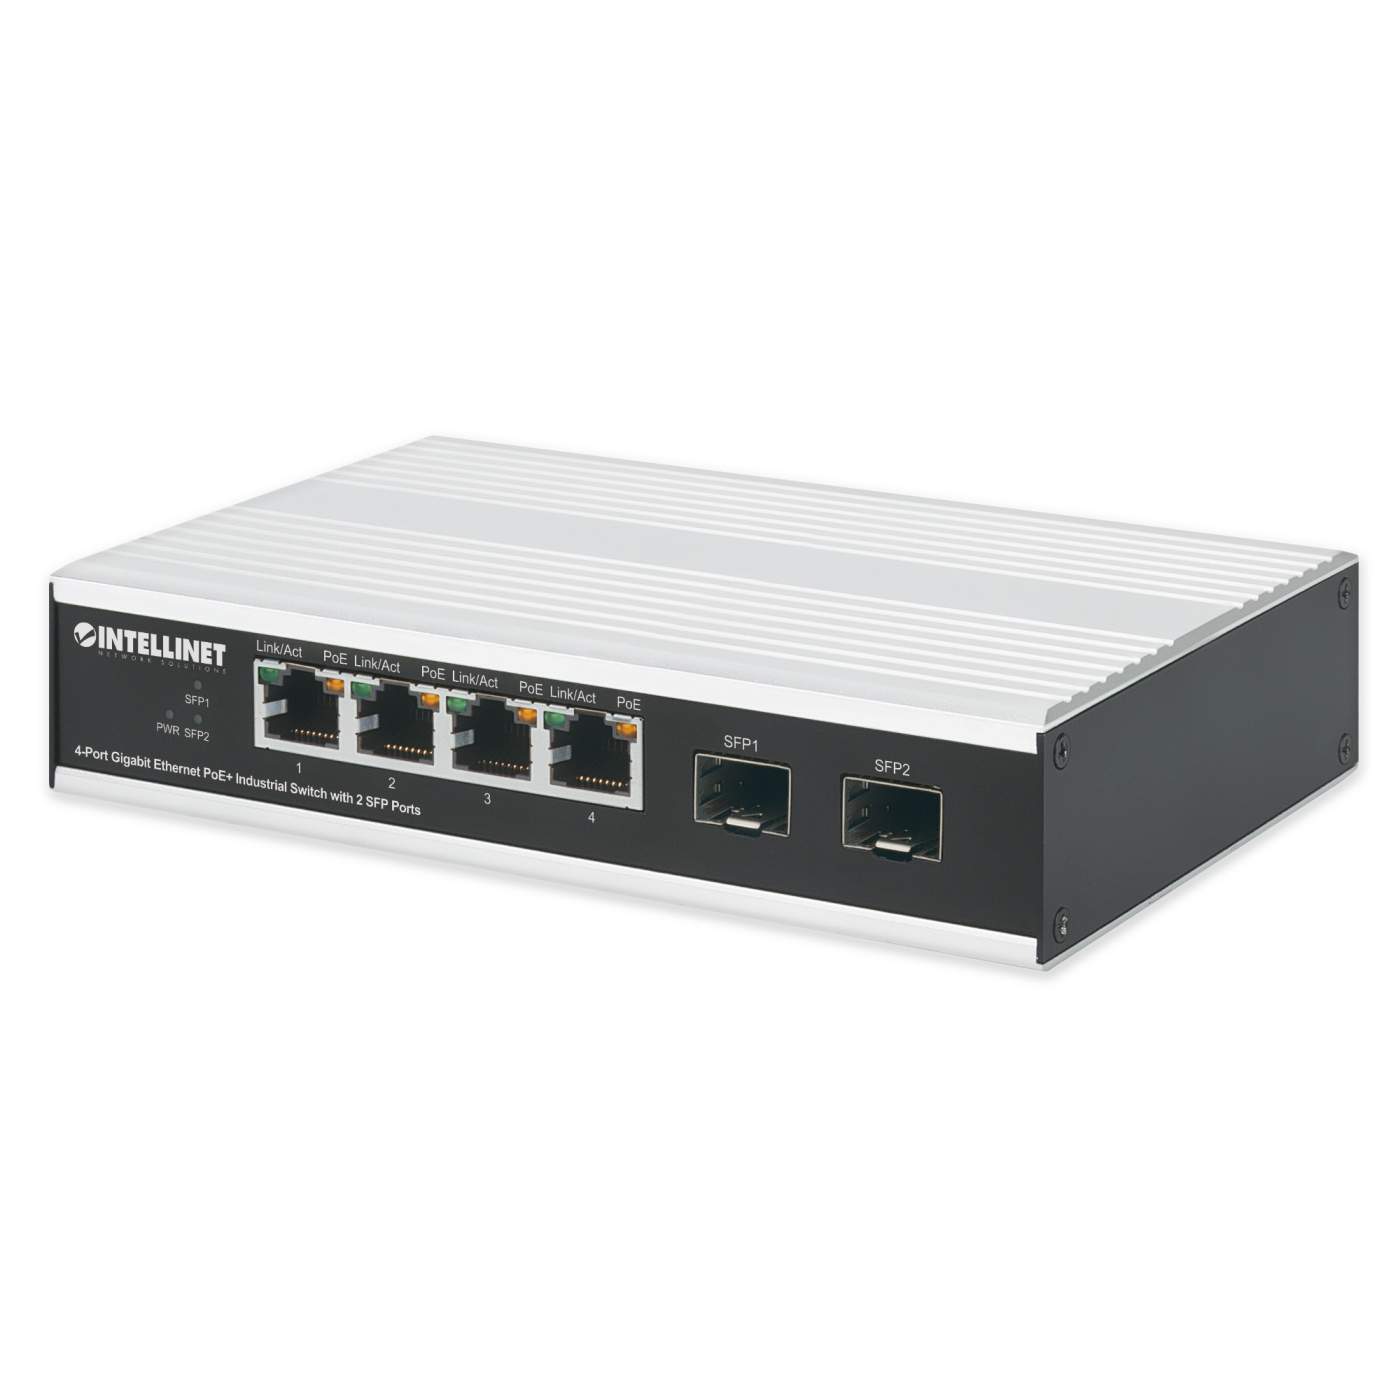 Industrial 6Port Gigabit Ethernet Switch - Ethernet Switches, Networking  IO Products